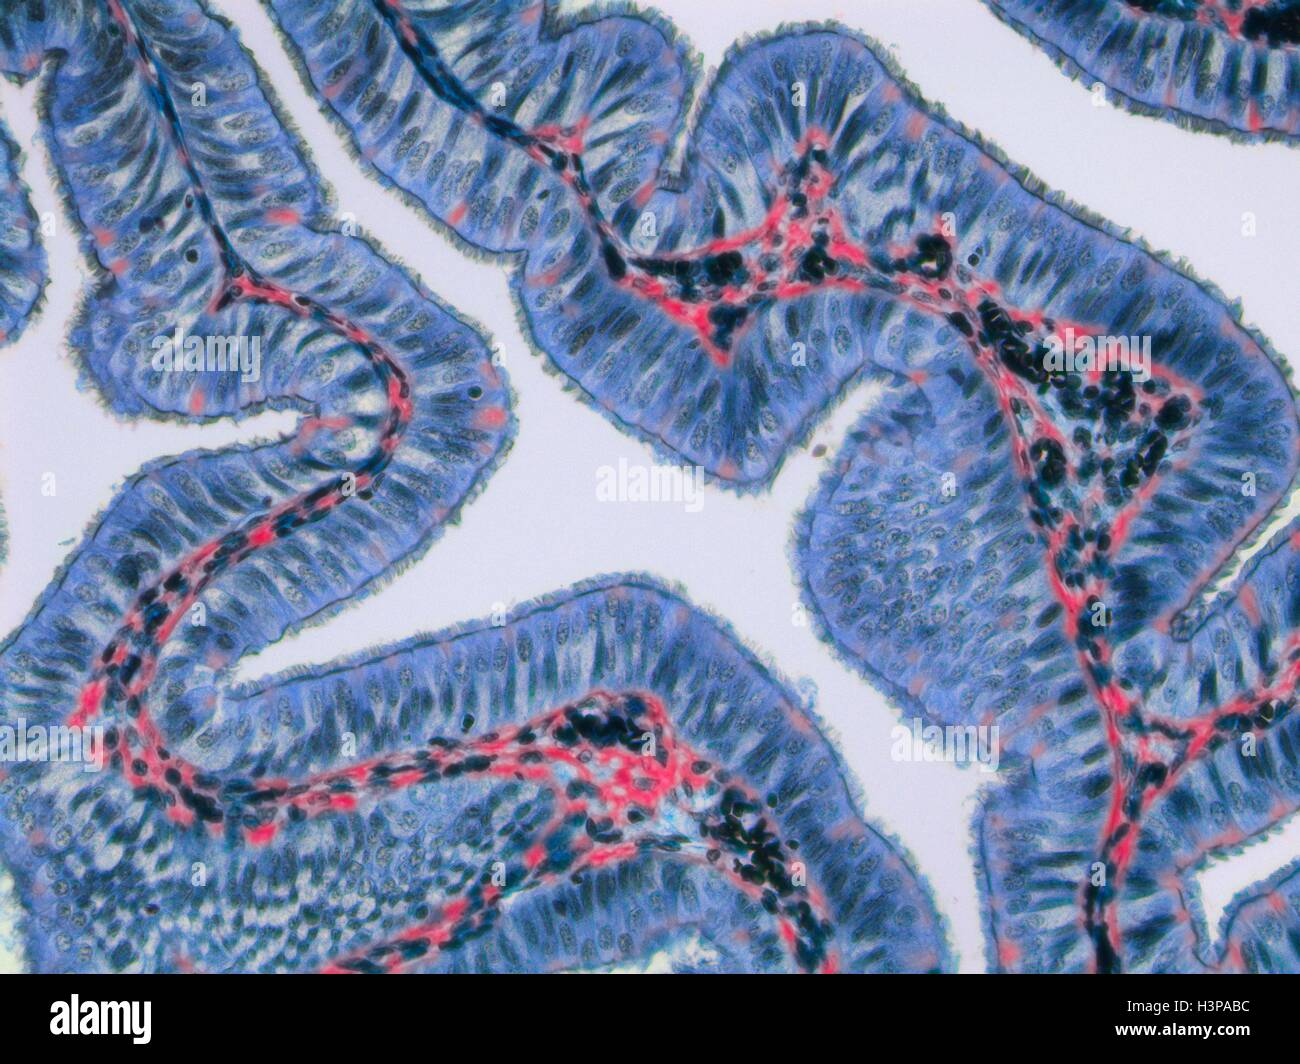 Fallopian tube. Light micrograph (LM).The fallopian tube, or oviduct, conveys the egg from the ovary to the uterus. Ciliated columnar epithelium is blue, connective tissue is red and blood vessels are black. Magnification: x120 when printed at 10 centimetres wide. Stock Photo